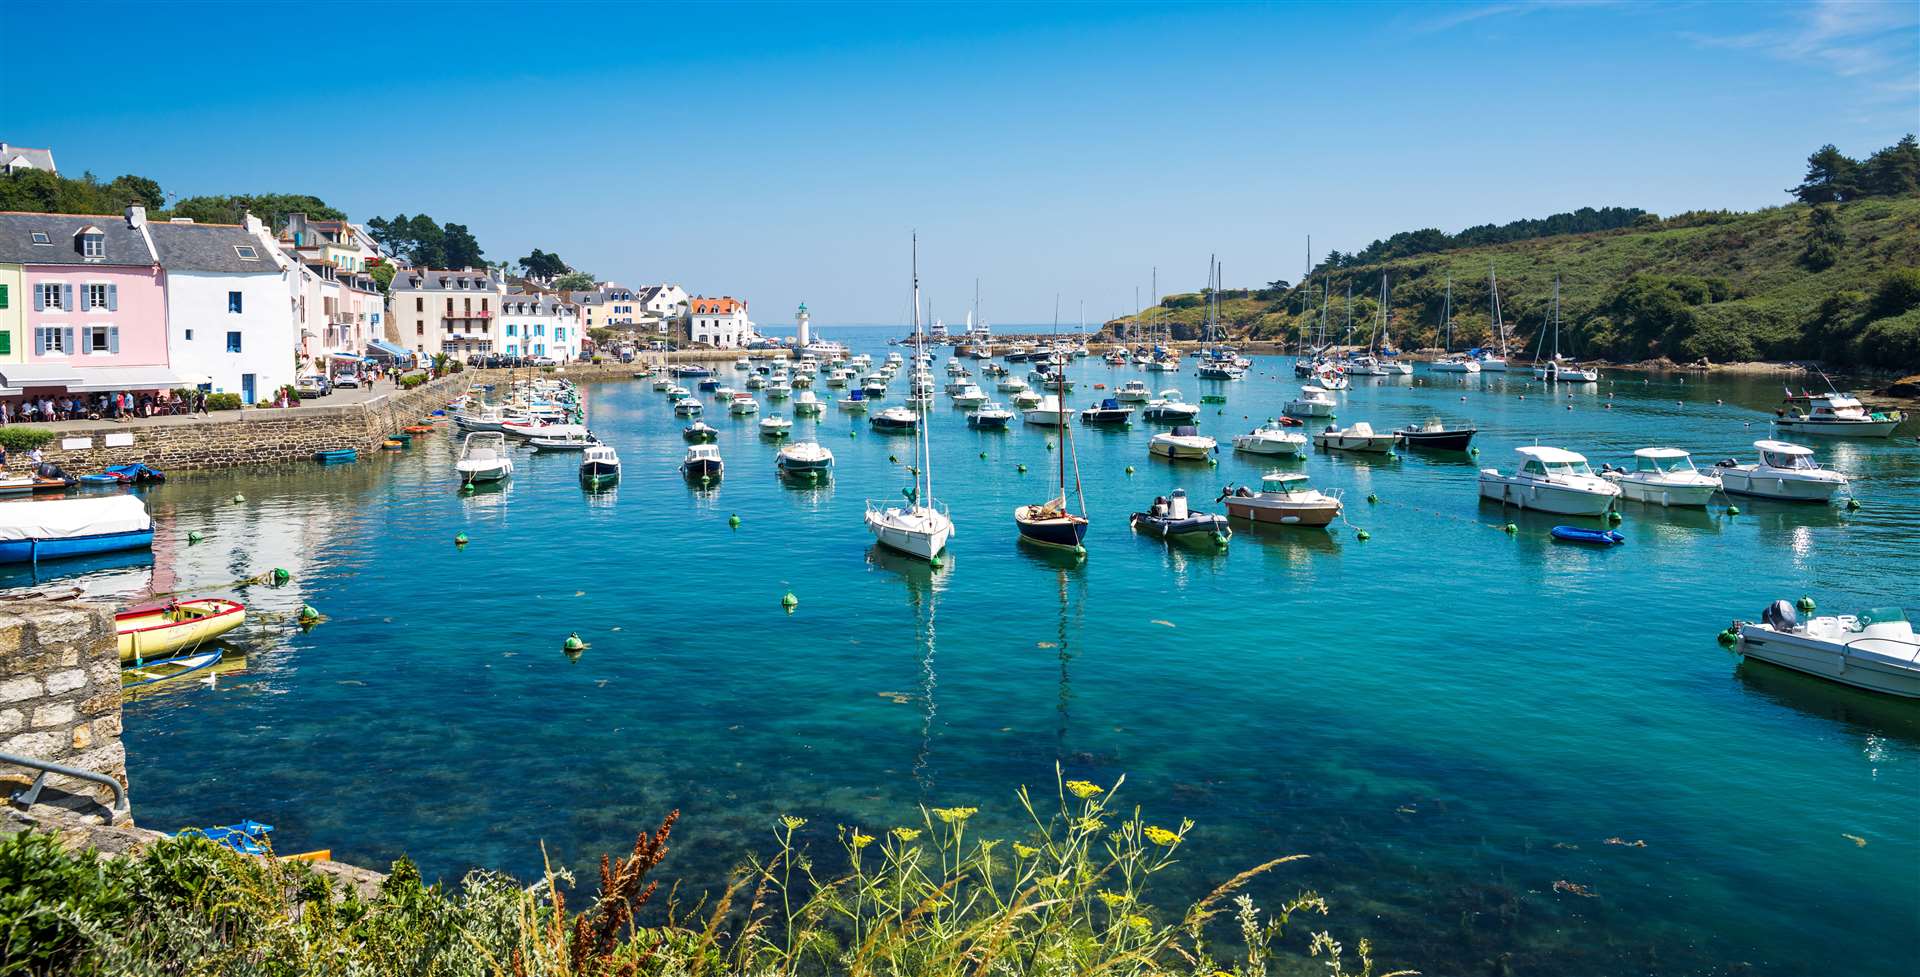 With its majestic coast, Brittany’s Belle-Ile-en-Mer is a popular hot spot for visitors.